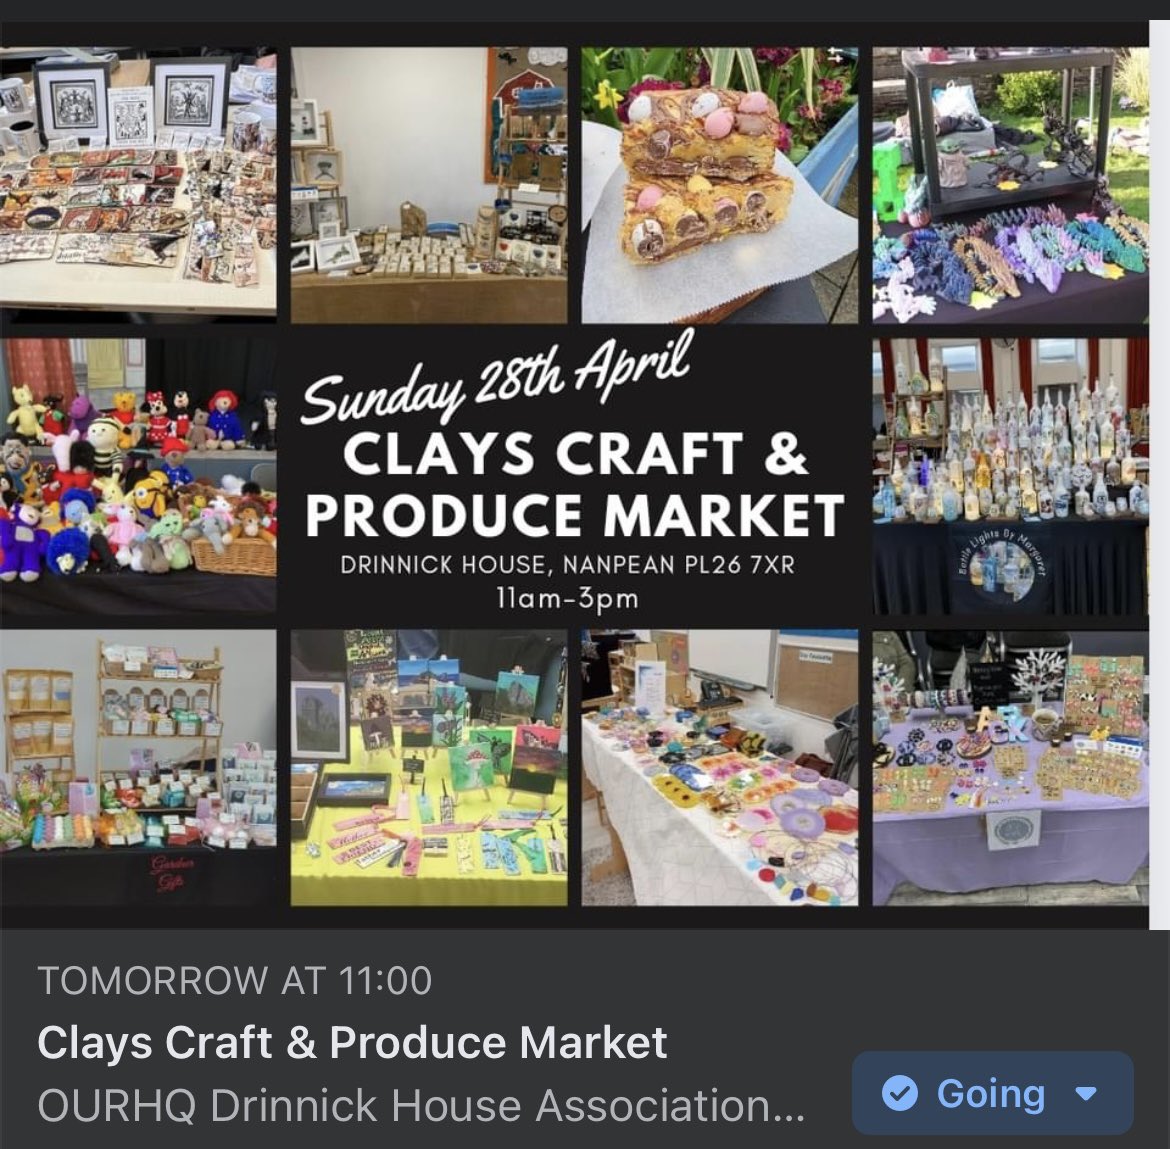 Looking forward to having a stall here tomorrow! #SupportLocal #cornwall #staustell